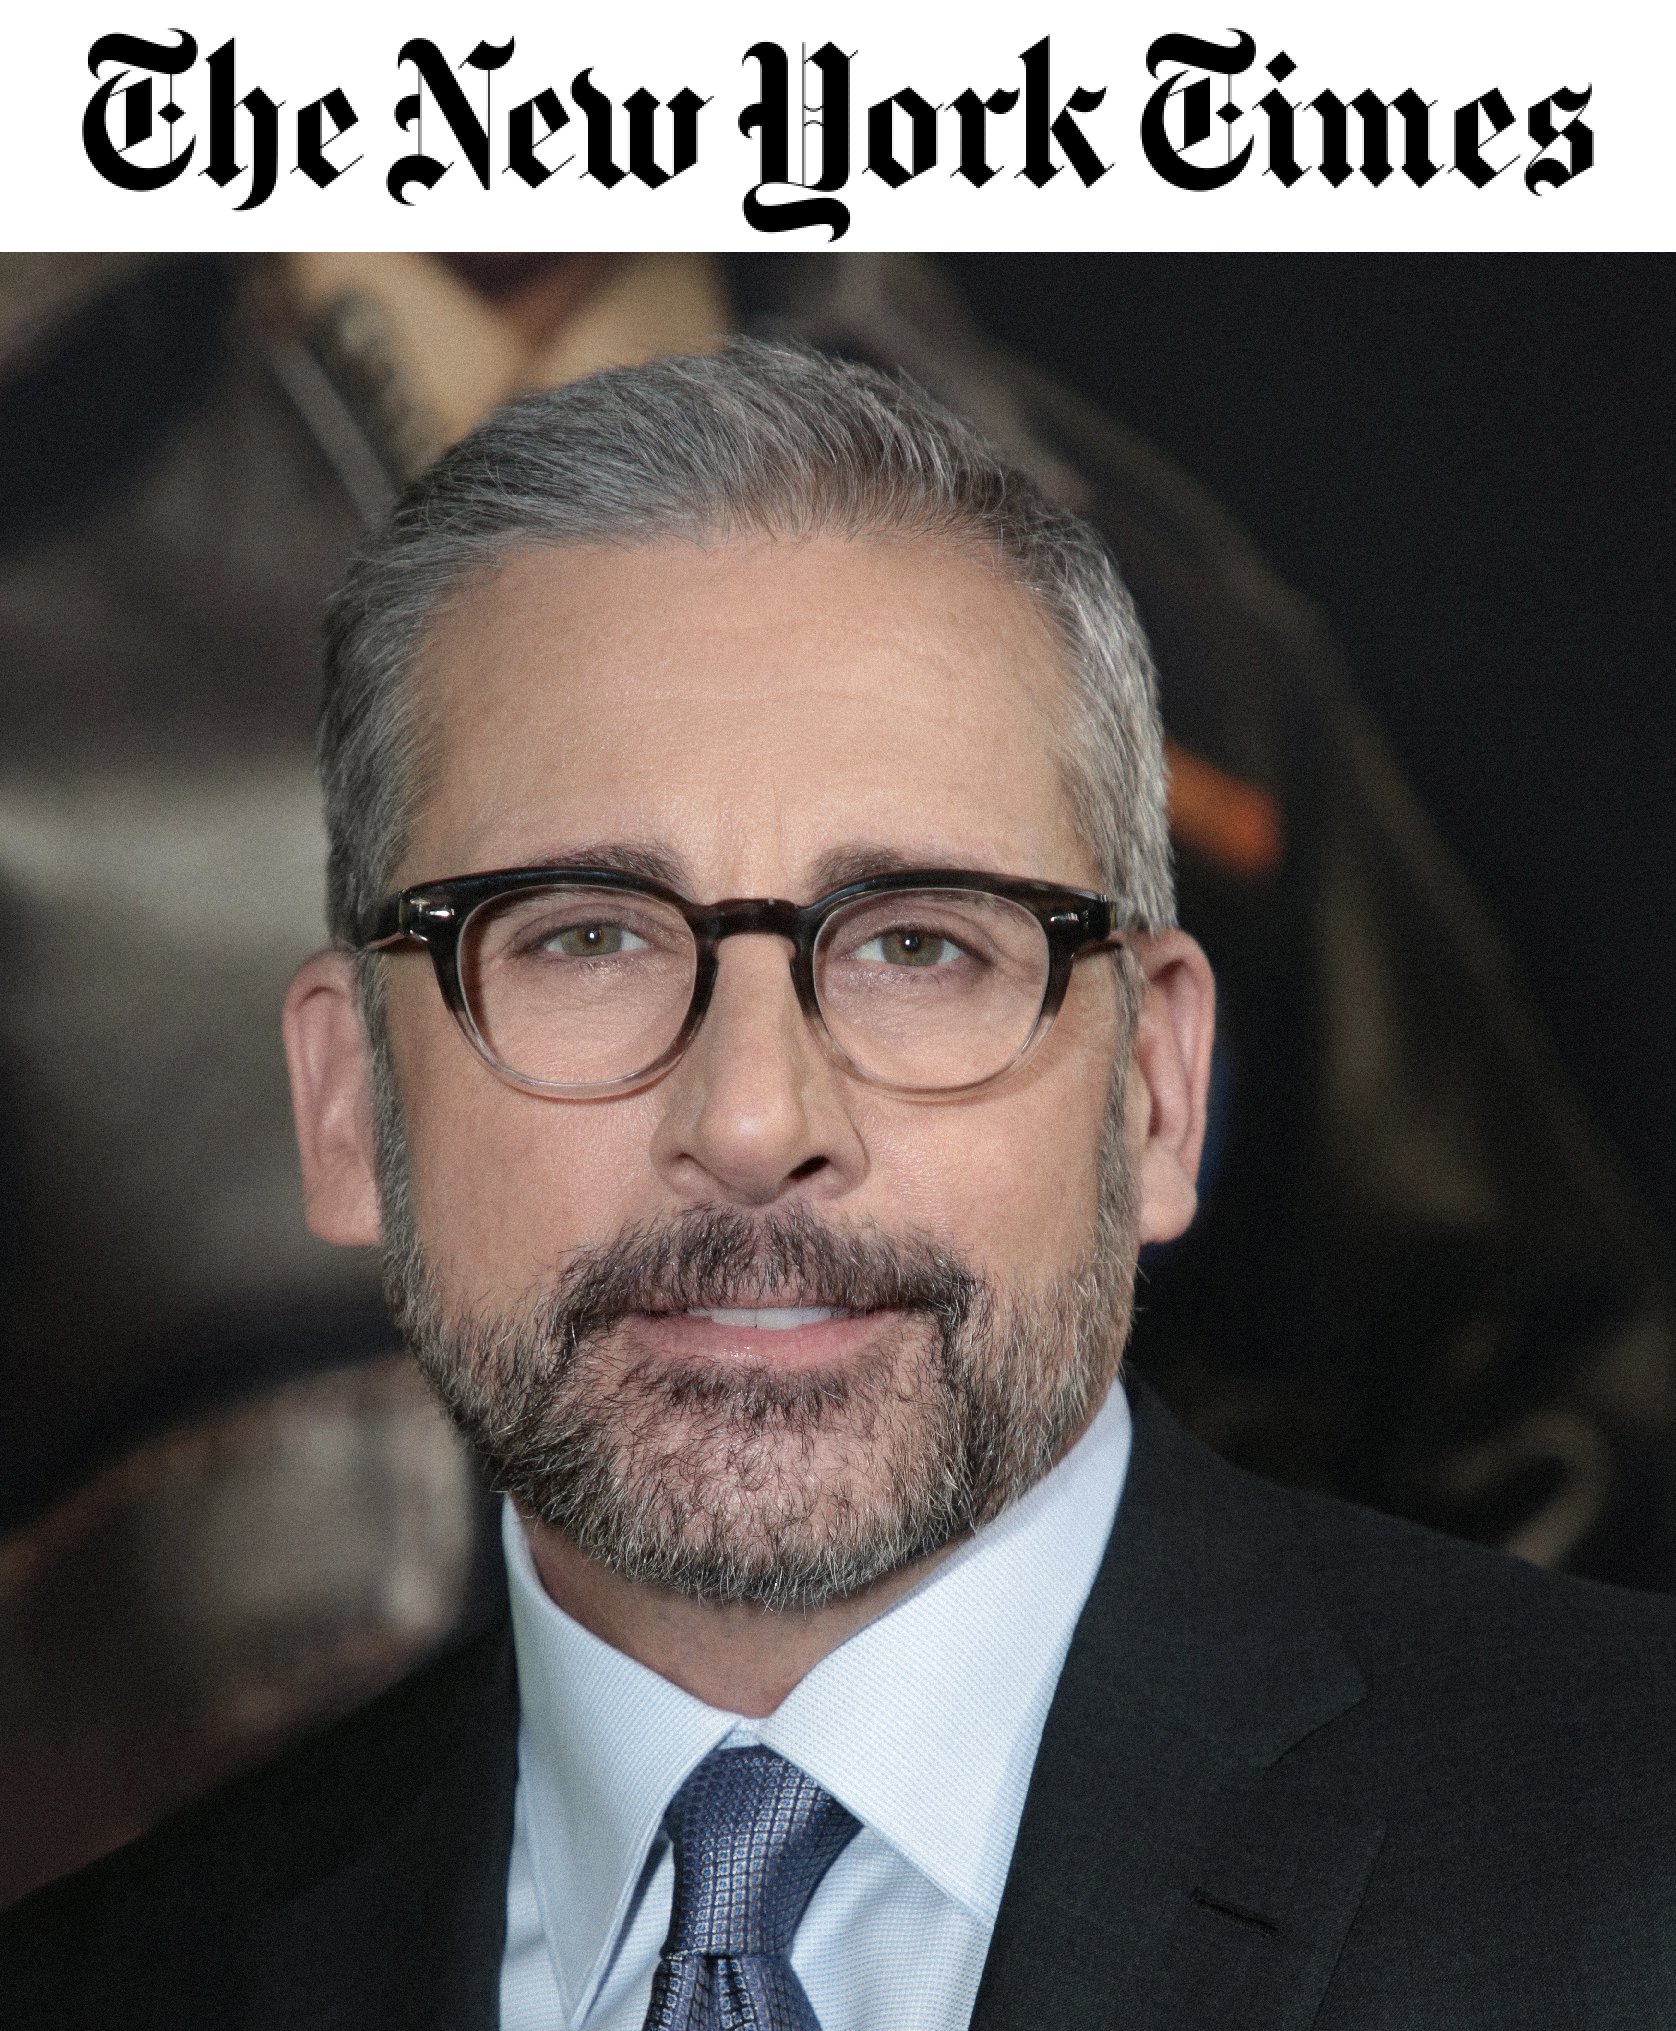 Steve Carell. Photo credit - Alex J. Berliner - AB Images for Universal Pictures